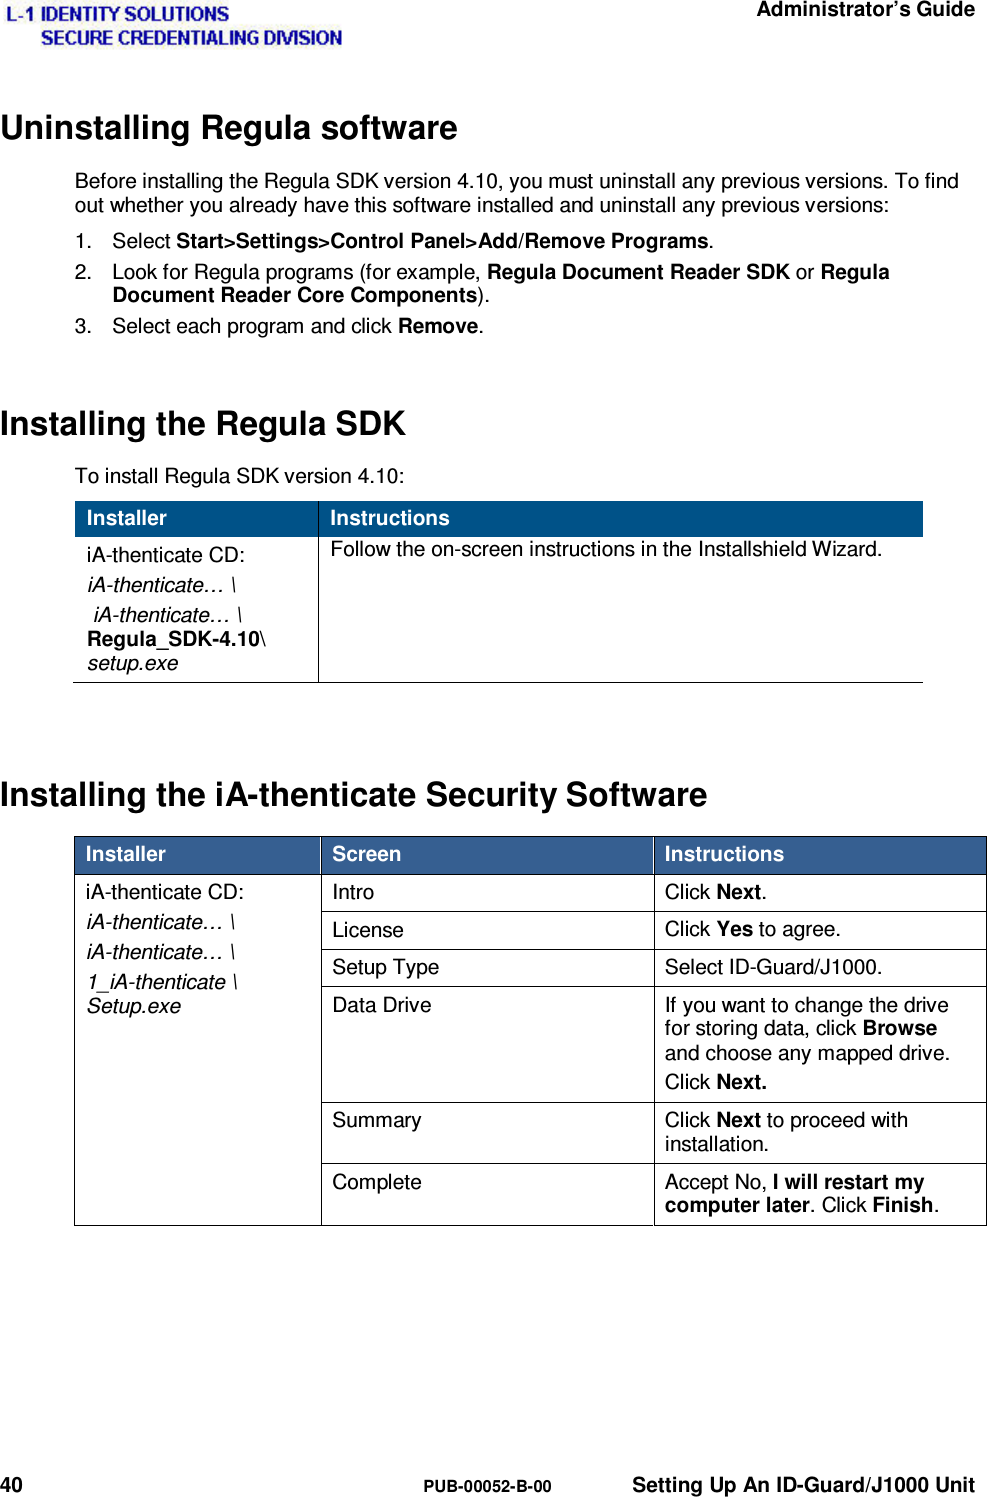   Administrator’s Guide 40  PUB-00052-B-00  Setting Up An ID-Guard/J1000 Unit Uninstalling Regula software Before installing the Regula SDK version 4.10, you must uninstall any previous versions. To find out whether you already have this software installed and uninstall any previous versions: 1. Select Start&gt;Settings&gt;Control Panel&gt;Add/Remove Programs. 2.  Look for Regula programs (for example, Regula Document Reader SDK or Regula Document Reader Core Components). 3.  Select each program and click Remove. Installing the Regula SDK To install Regula SDK version 4.10: Installer  Instructions iA-thenticate CD: iA-thenticate… \  iA-thenticate… \ Regula_SDK-4.10\ setup.exe Follow the on-screen instructions in the Installshield Wizard.  Installing the iA-thenticate Security Software Installer  Screen  Instructions iA-thenticate CD: iA-thenticate… \ iA-thenticate… \ 1_iA-thenticate \ Setup.exe Intro  Click Next. License  Click Yes to agree. Setup Type  Select ID-Guard/J1000. Data Drive  If you want to change the drive for storing data, click Browse and choose any mapped drive. Click Next. Summary Click Next to proceed with installation. Complete Accept No, I will restart my computer later. Click Finish.    